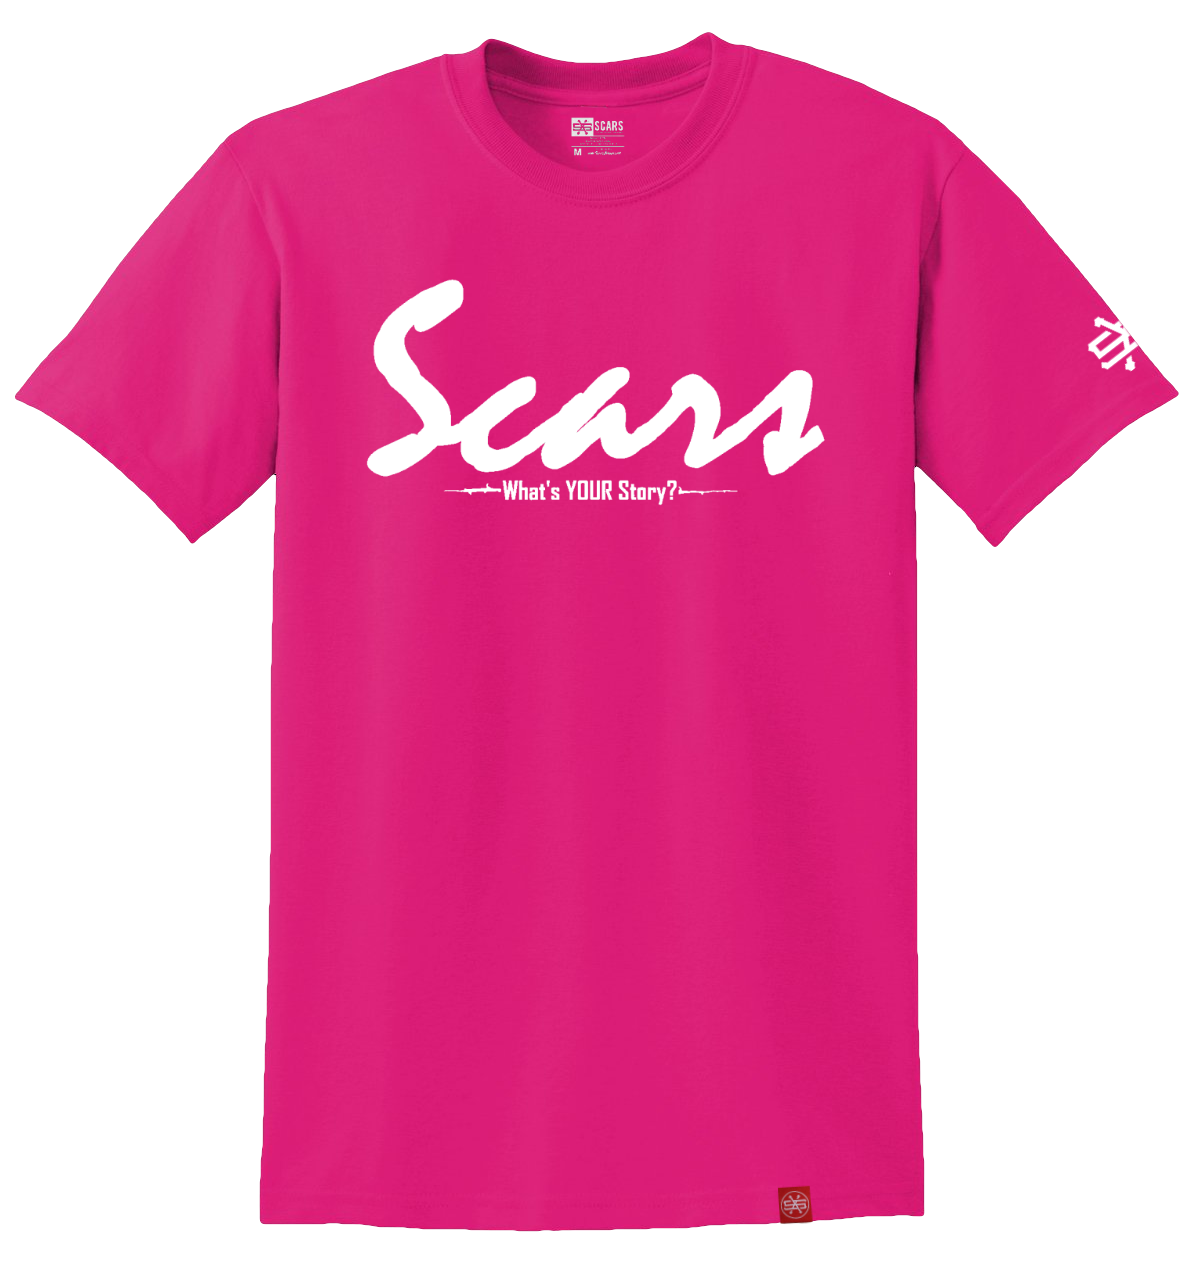 SCARS 'Pynk October' - "For The Cure" T-shirt